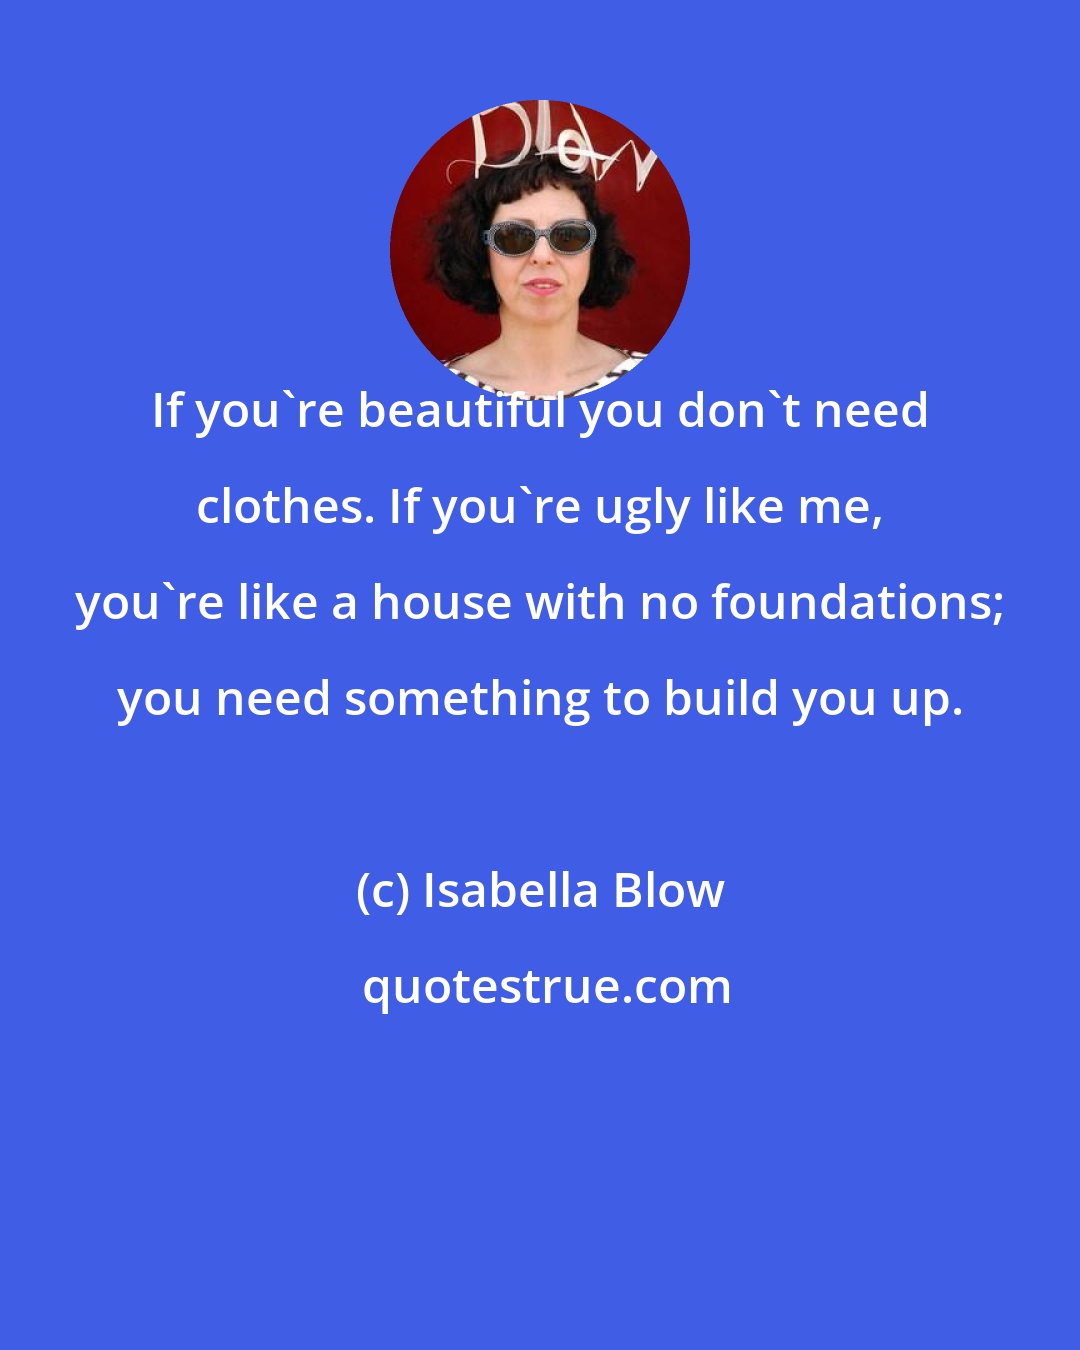 Isabella Blow: If you're beautiful you don't need clothes. If you're ugly like me, you're like a house with no foundations; you need something to build you up.